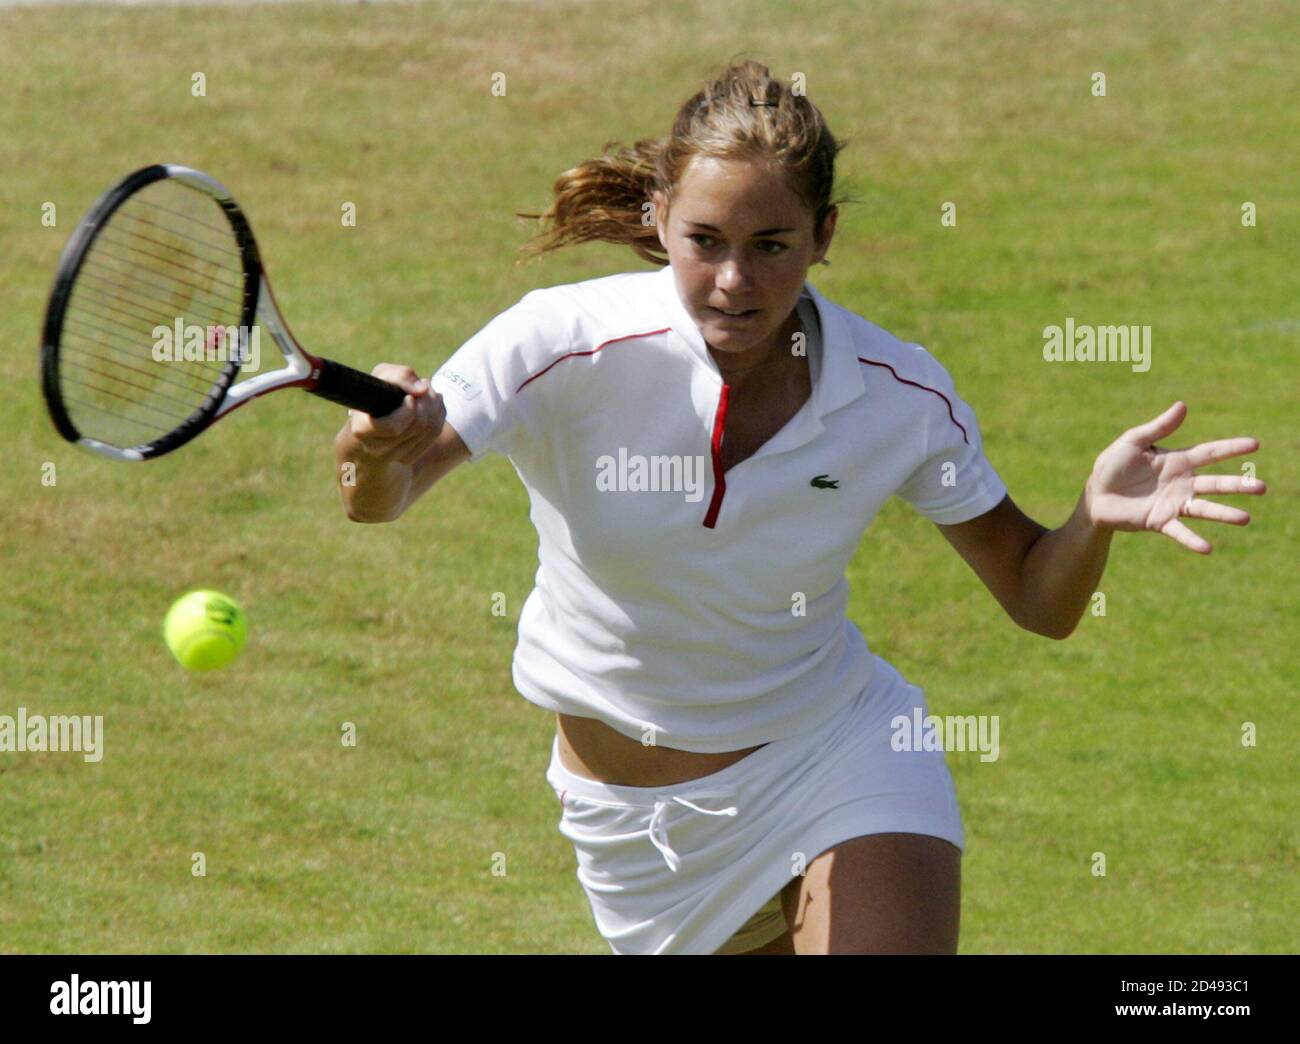 impliceren salade Kanon CZECH KOUKALOVA HITS FOREHAND TO FRENCH PIERCE DURING WOMEN'S FINAL OF  ORDINA OPEN TENNIS CHAMPIONSHIPS IN DEN BOSCH. Klara Koukalova of Czech  Republic hits a forehand to Mary Pierce of France during